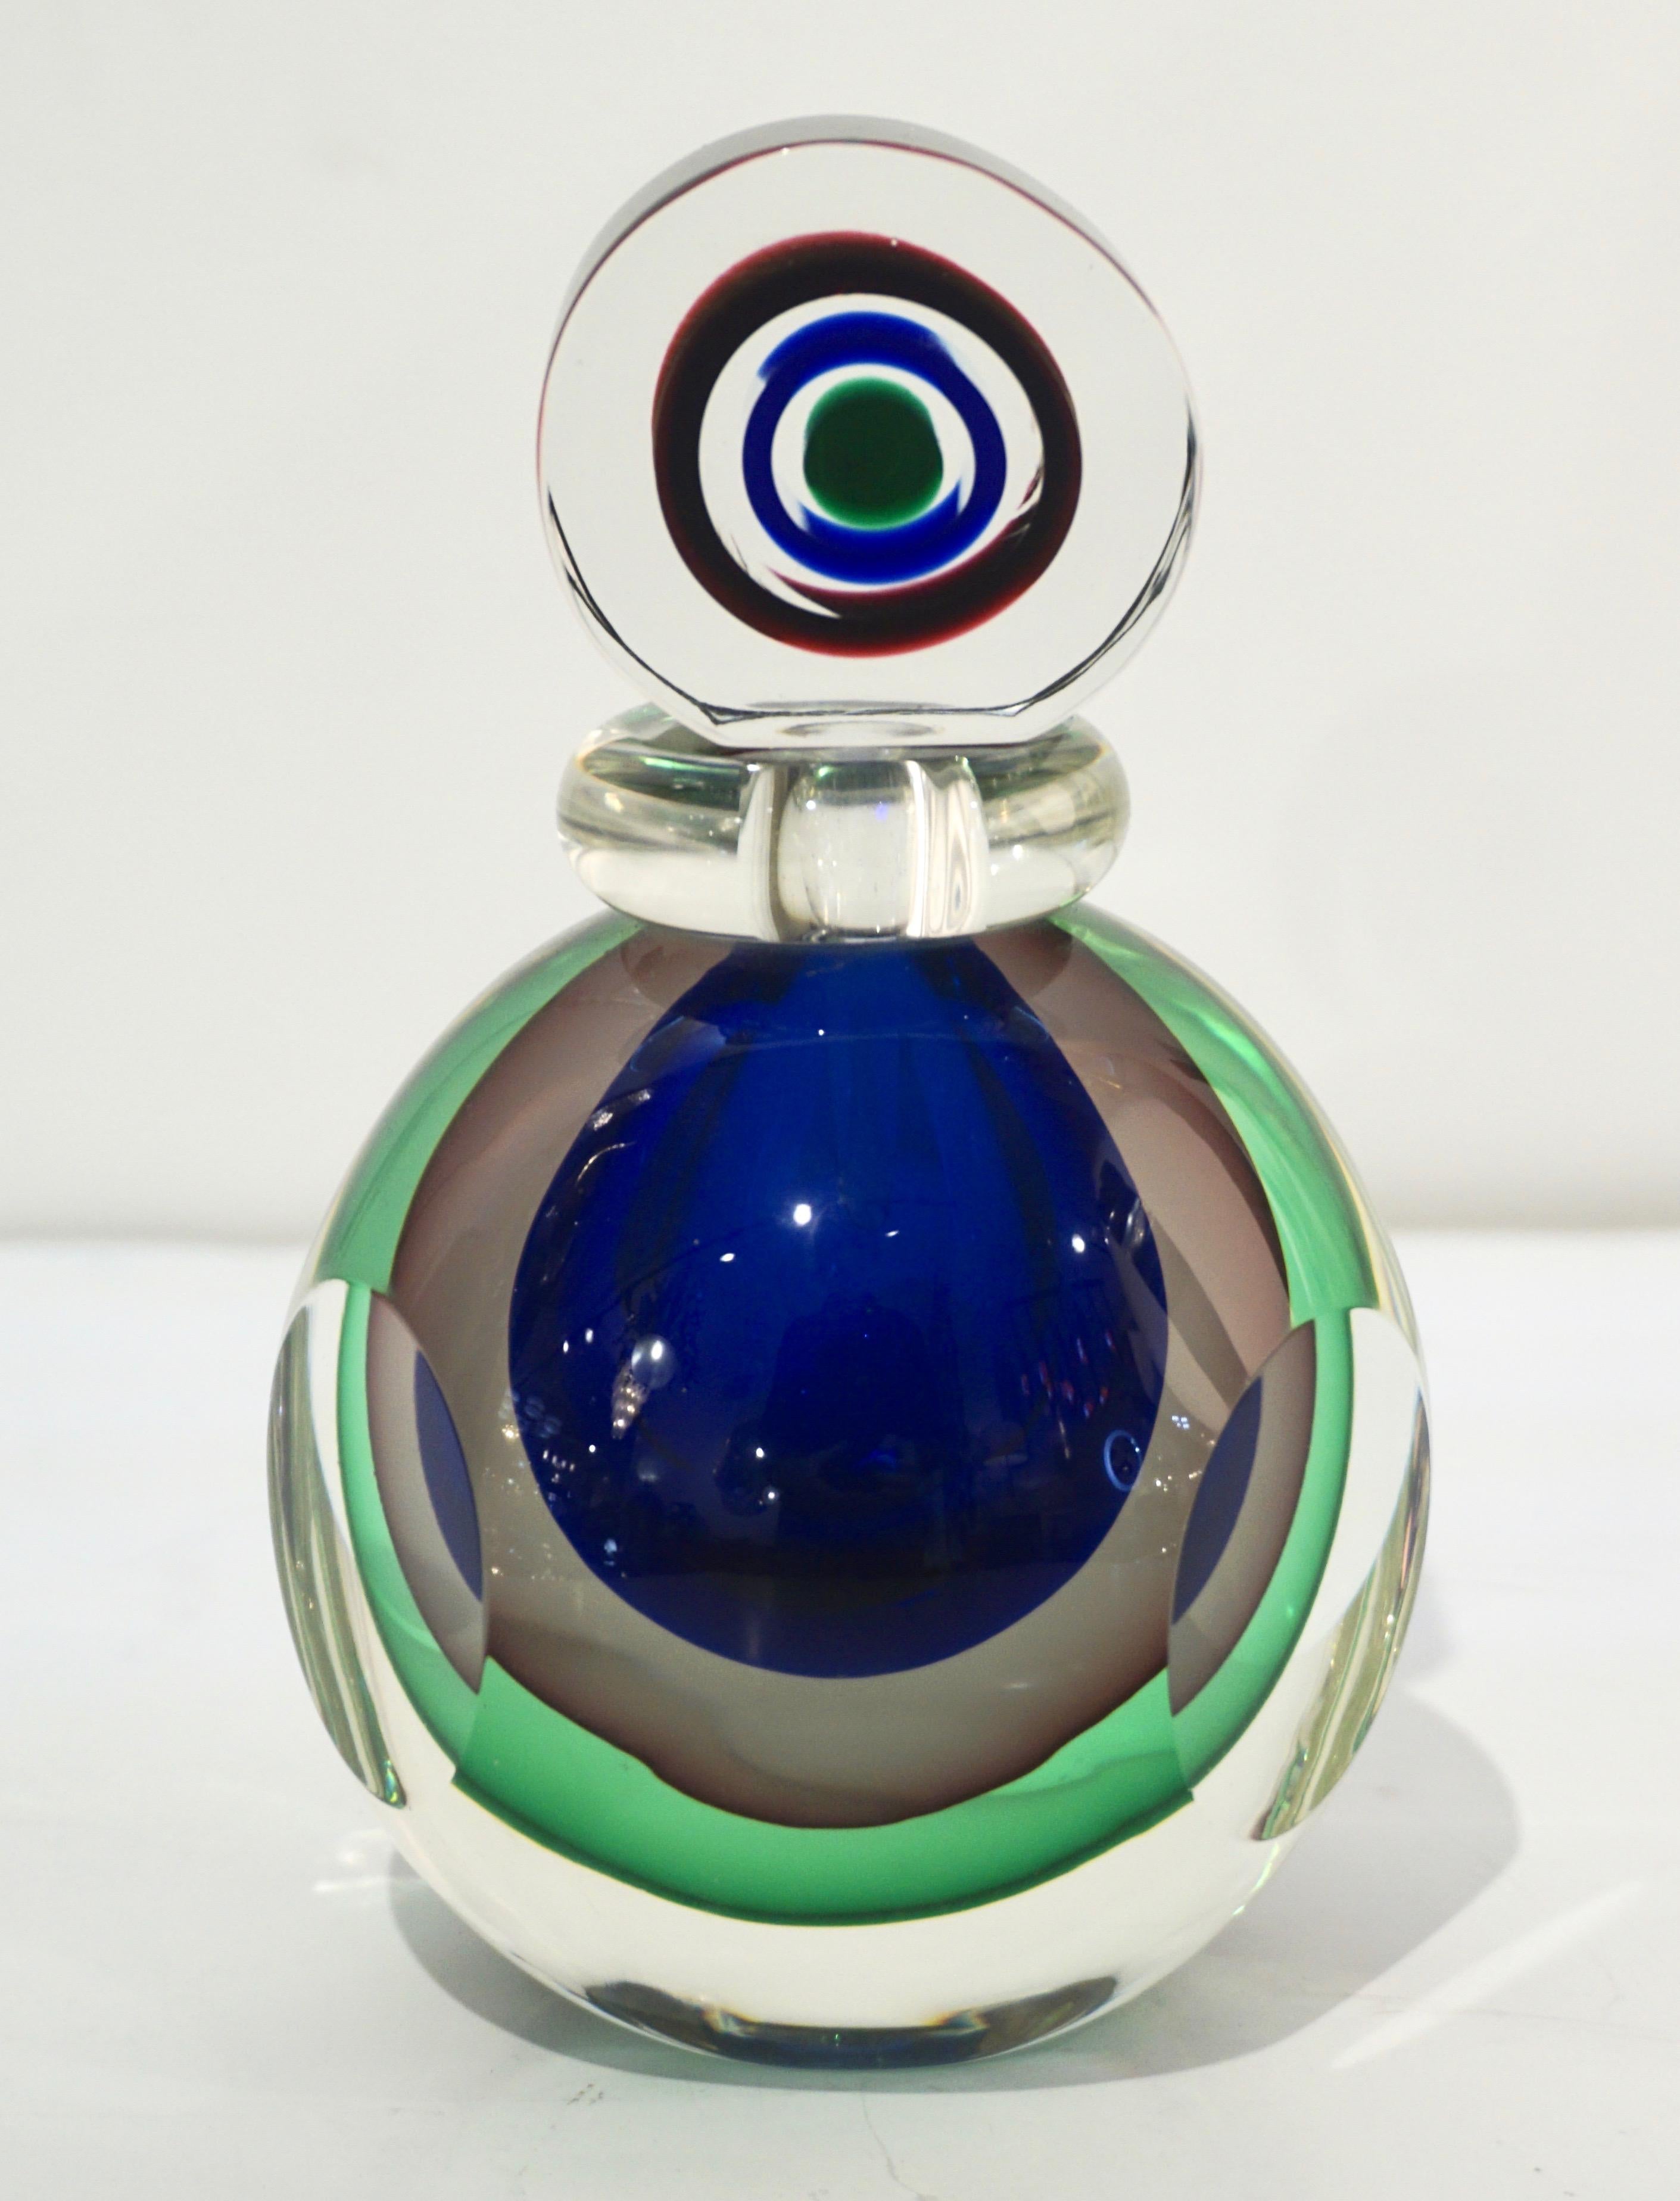 A vintage Murano glass perfume bottle of an interesting organic round shape with 3 flat decorative sides and unusual candy flat drop stopper, the body and the stopper each worked with the Venetian technique Sommerso: the 3 colors, green, royal blue